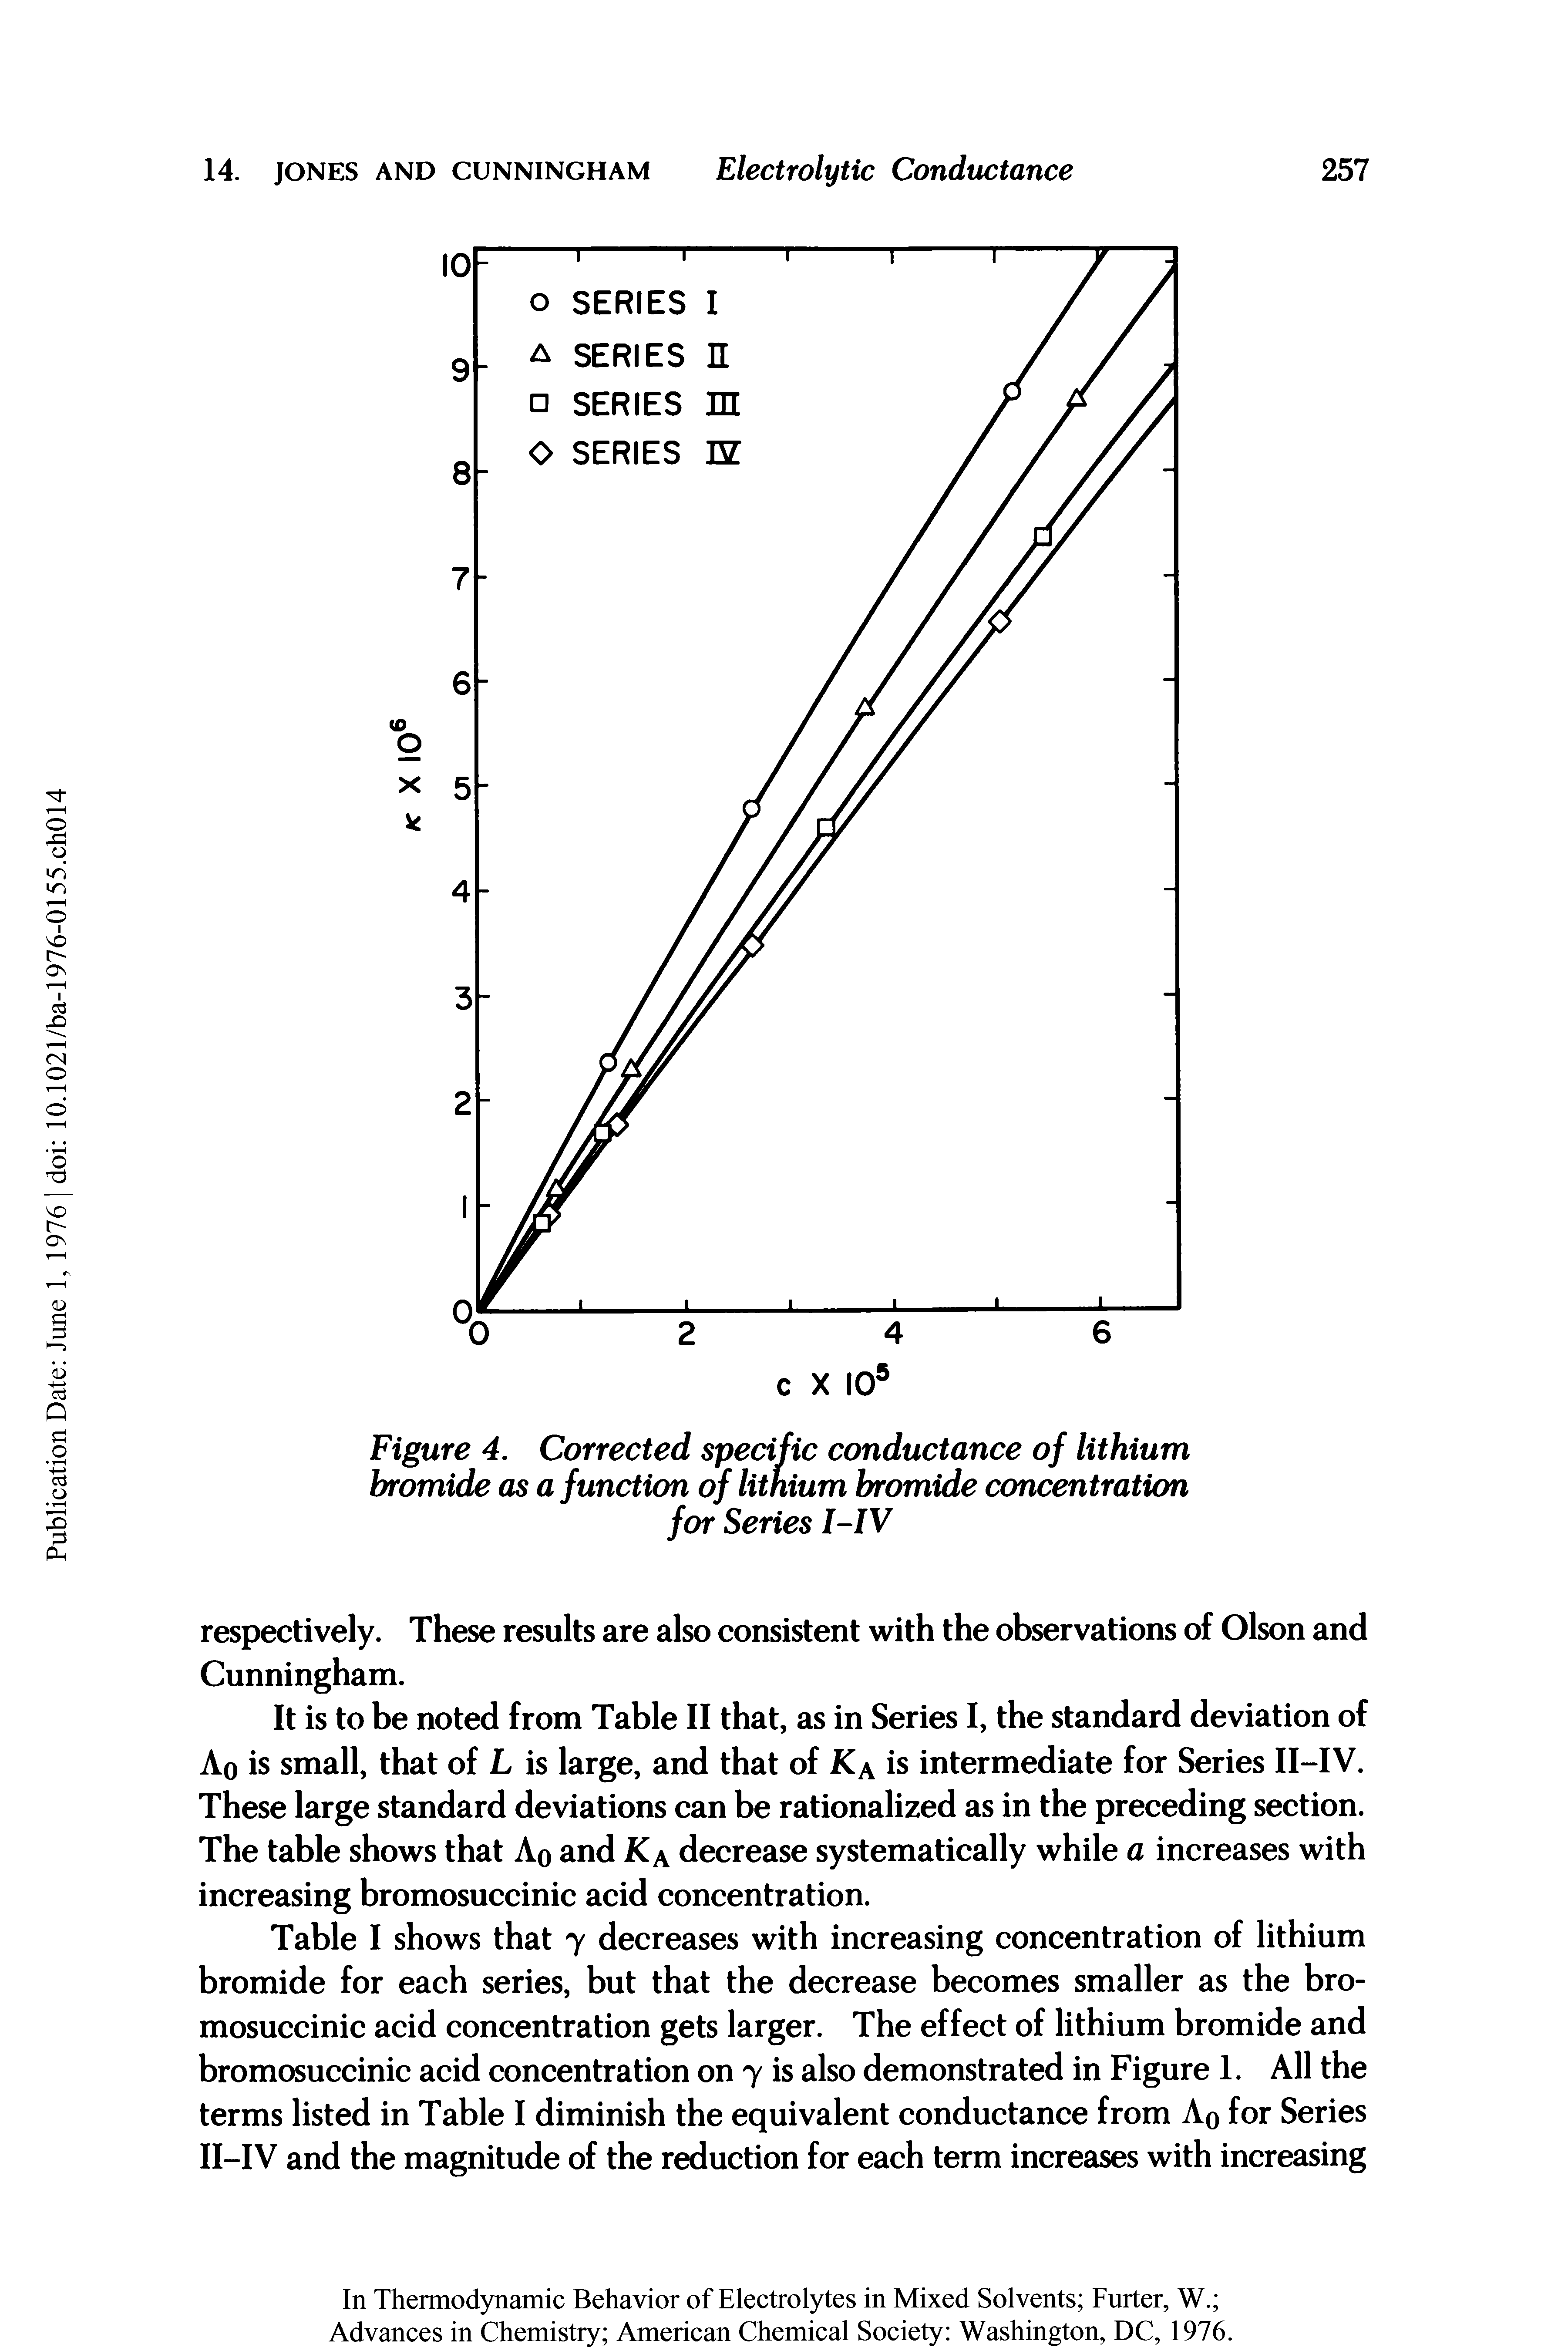 Table I shows that y decreases with increasing concentration of lithium bromide for each series, but that the decrease becomes smaller as the bromosuccinic acid concentration gets larger. The effect of lithium bromide and bromosuccinic acid concentration on y is also demonstrated in Figure 1. All the terms listed in Table I diminish the equivalent conductance from Aq for Series II-IV and the magnitude of the reduction for each term increases with increasing...